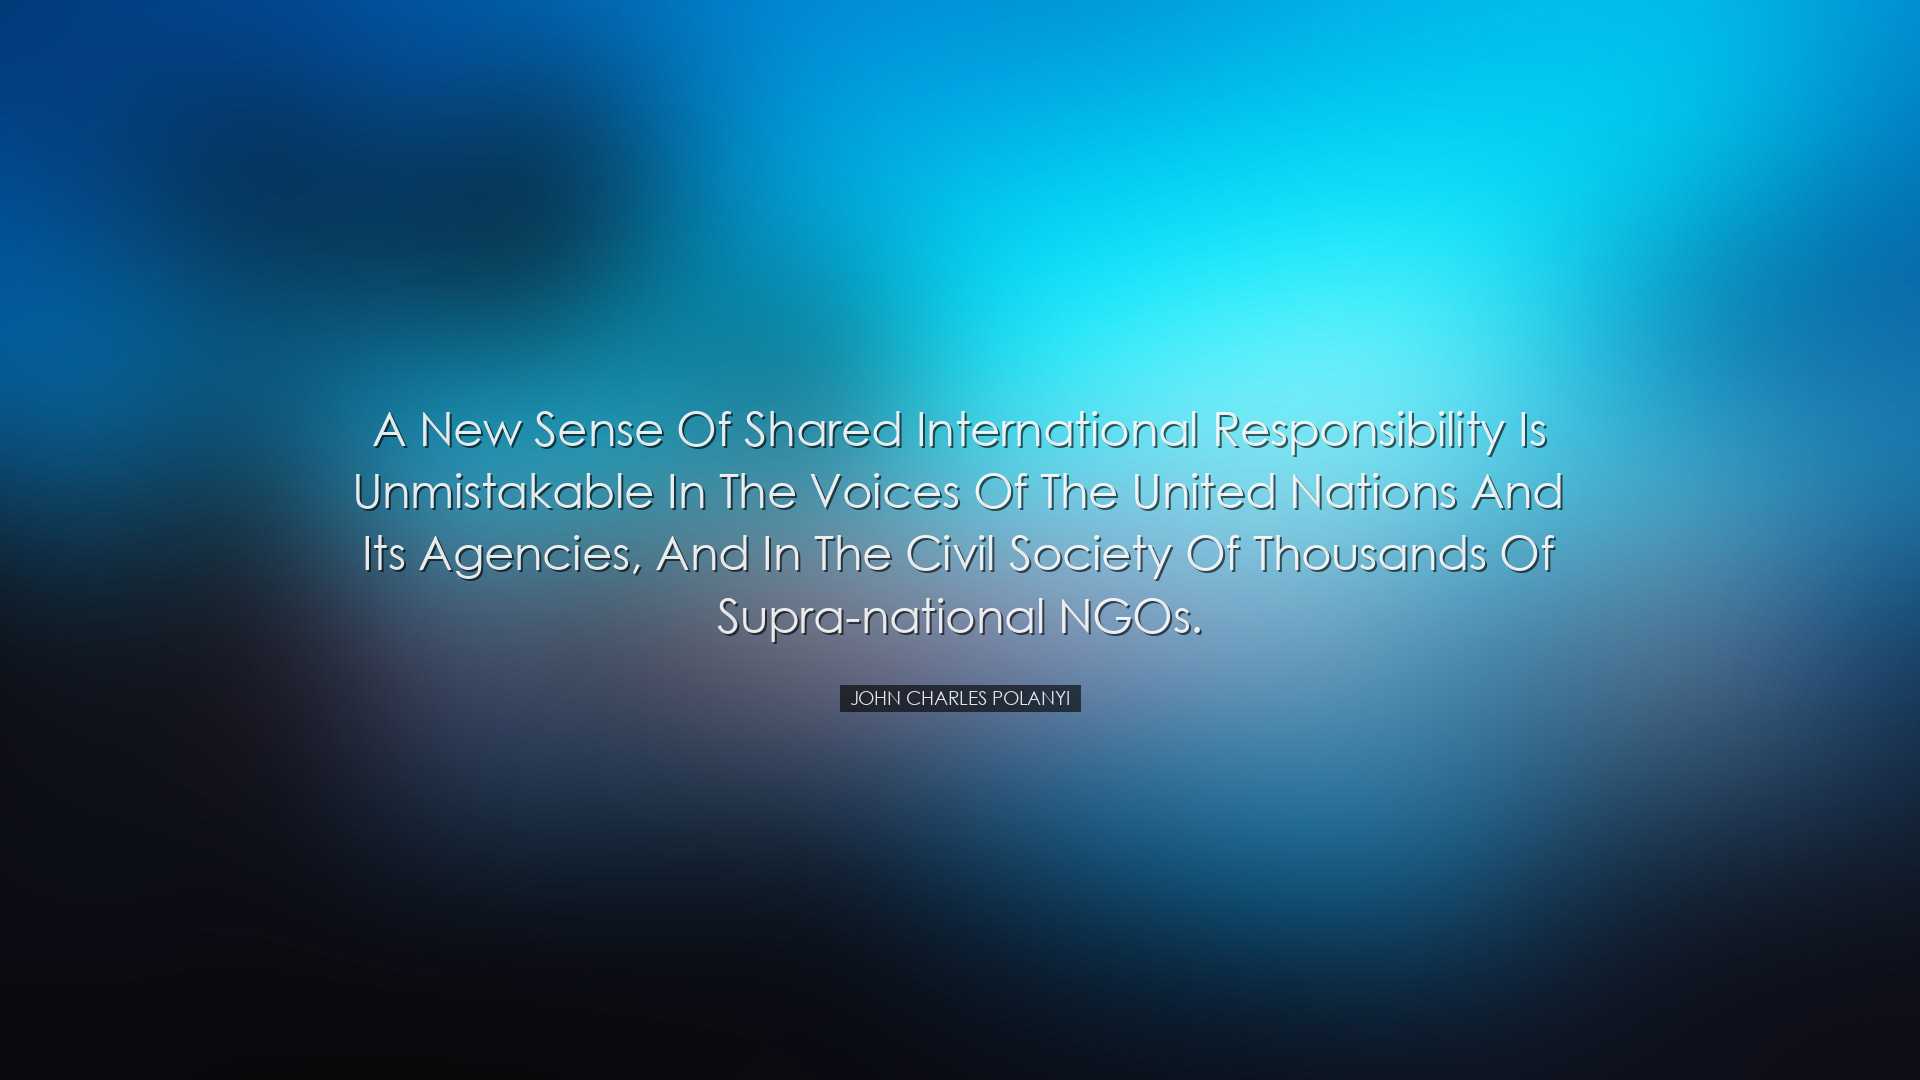 A new sense of shared international responsibility is unmistakable